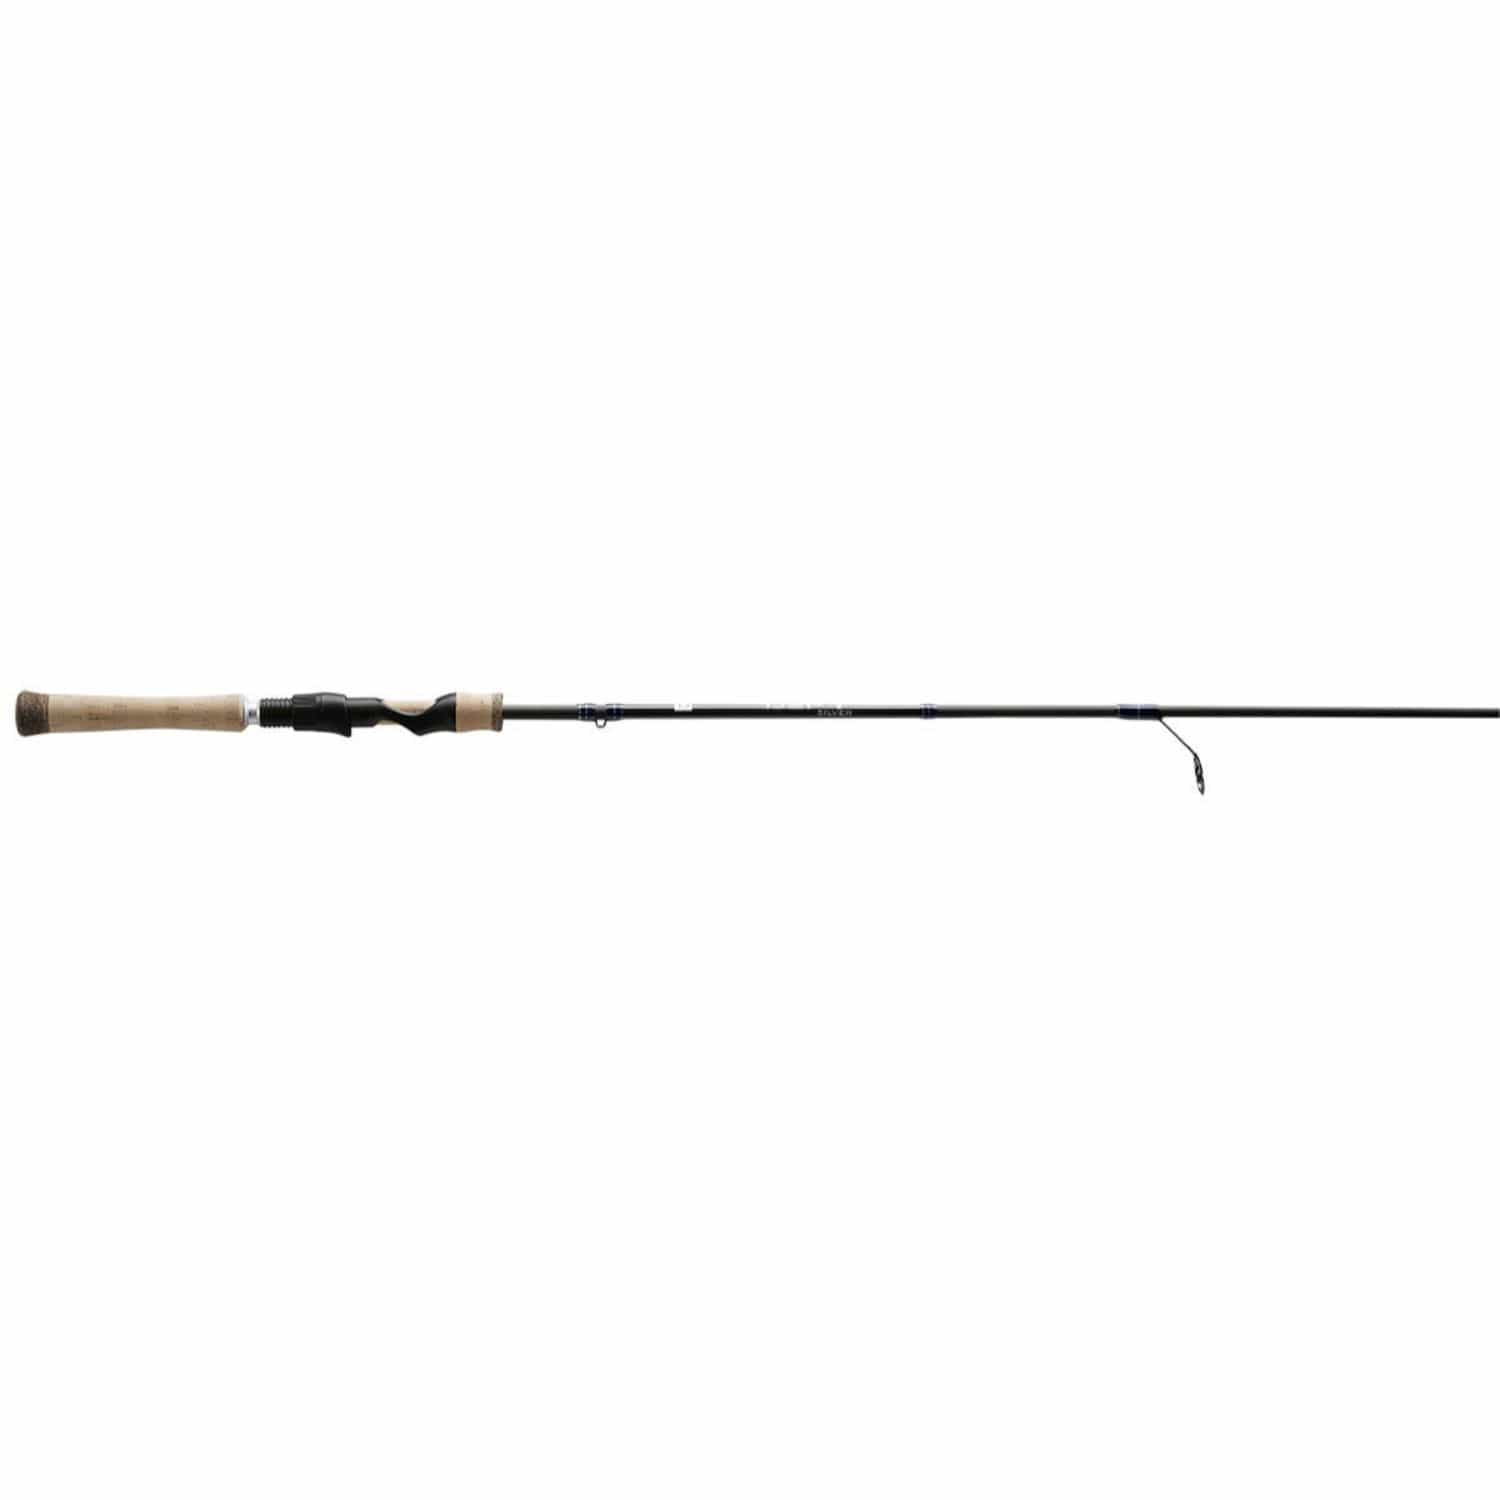 13 Fishing Fishing : Rods 13 Fishing Defy Silver 6 ft 6 in L Spinning Rod 2pc